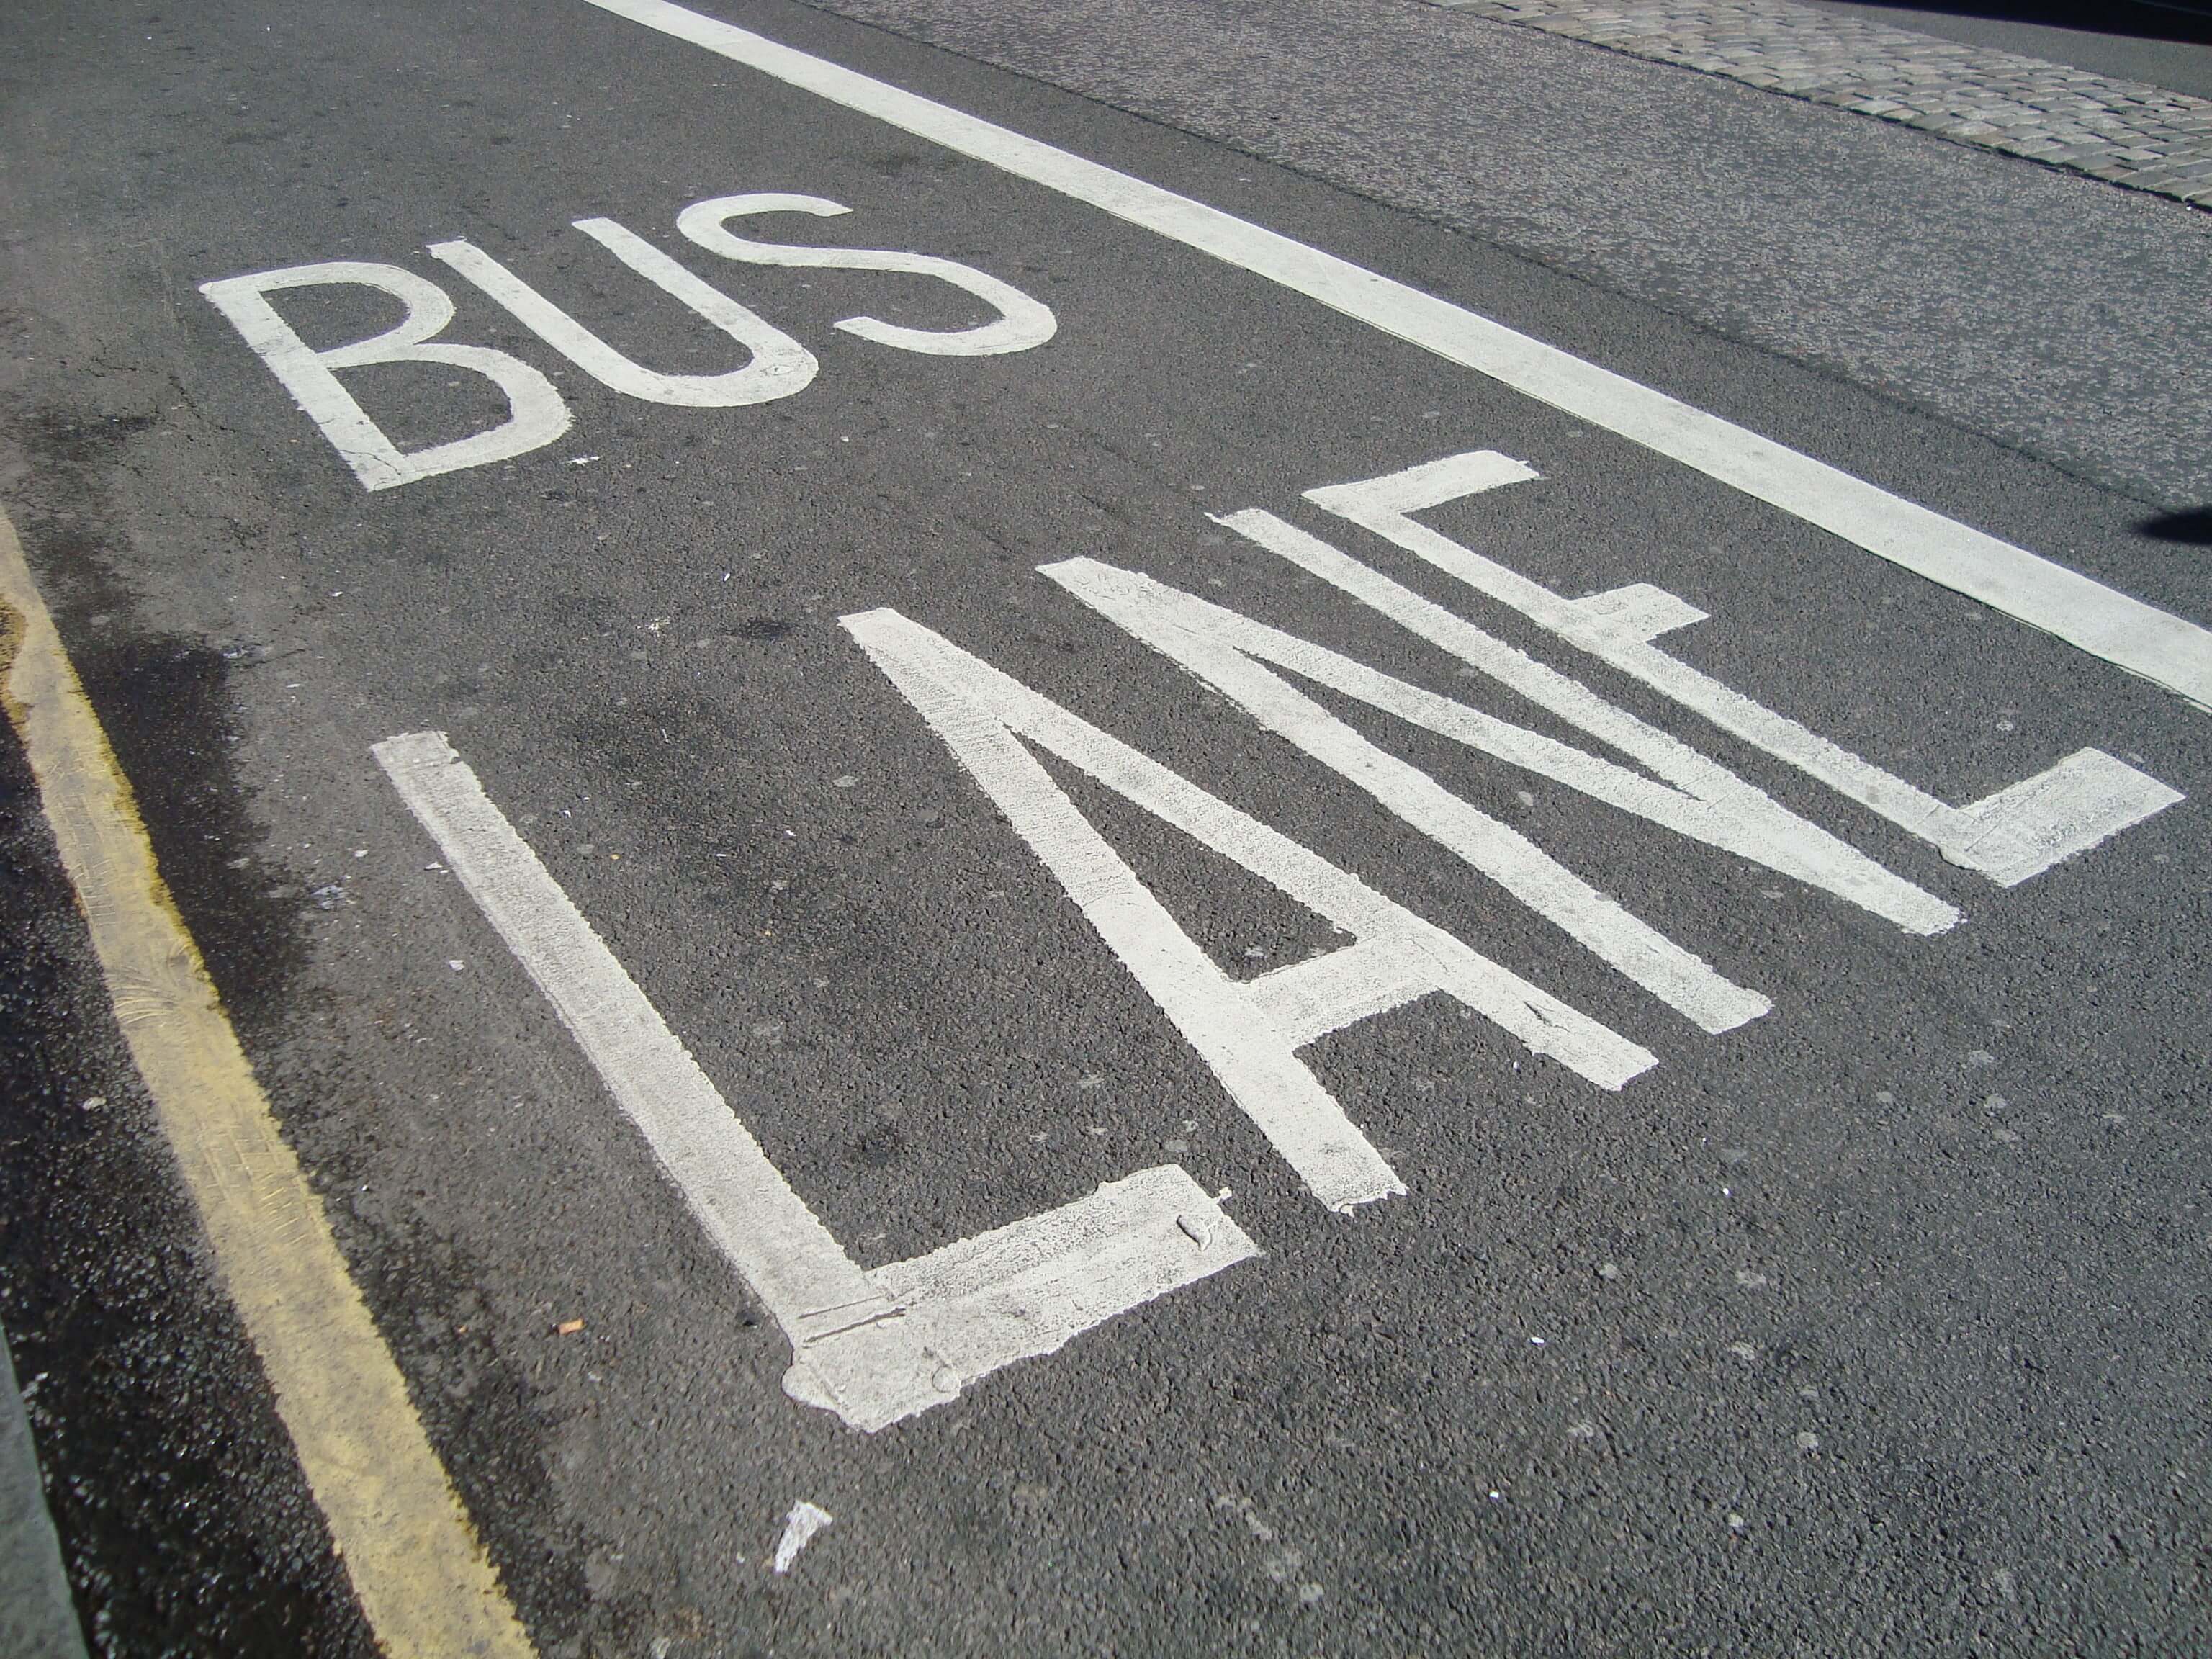 Bus lanes open for electric car owners in a number of UK areas